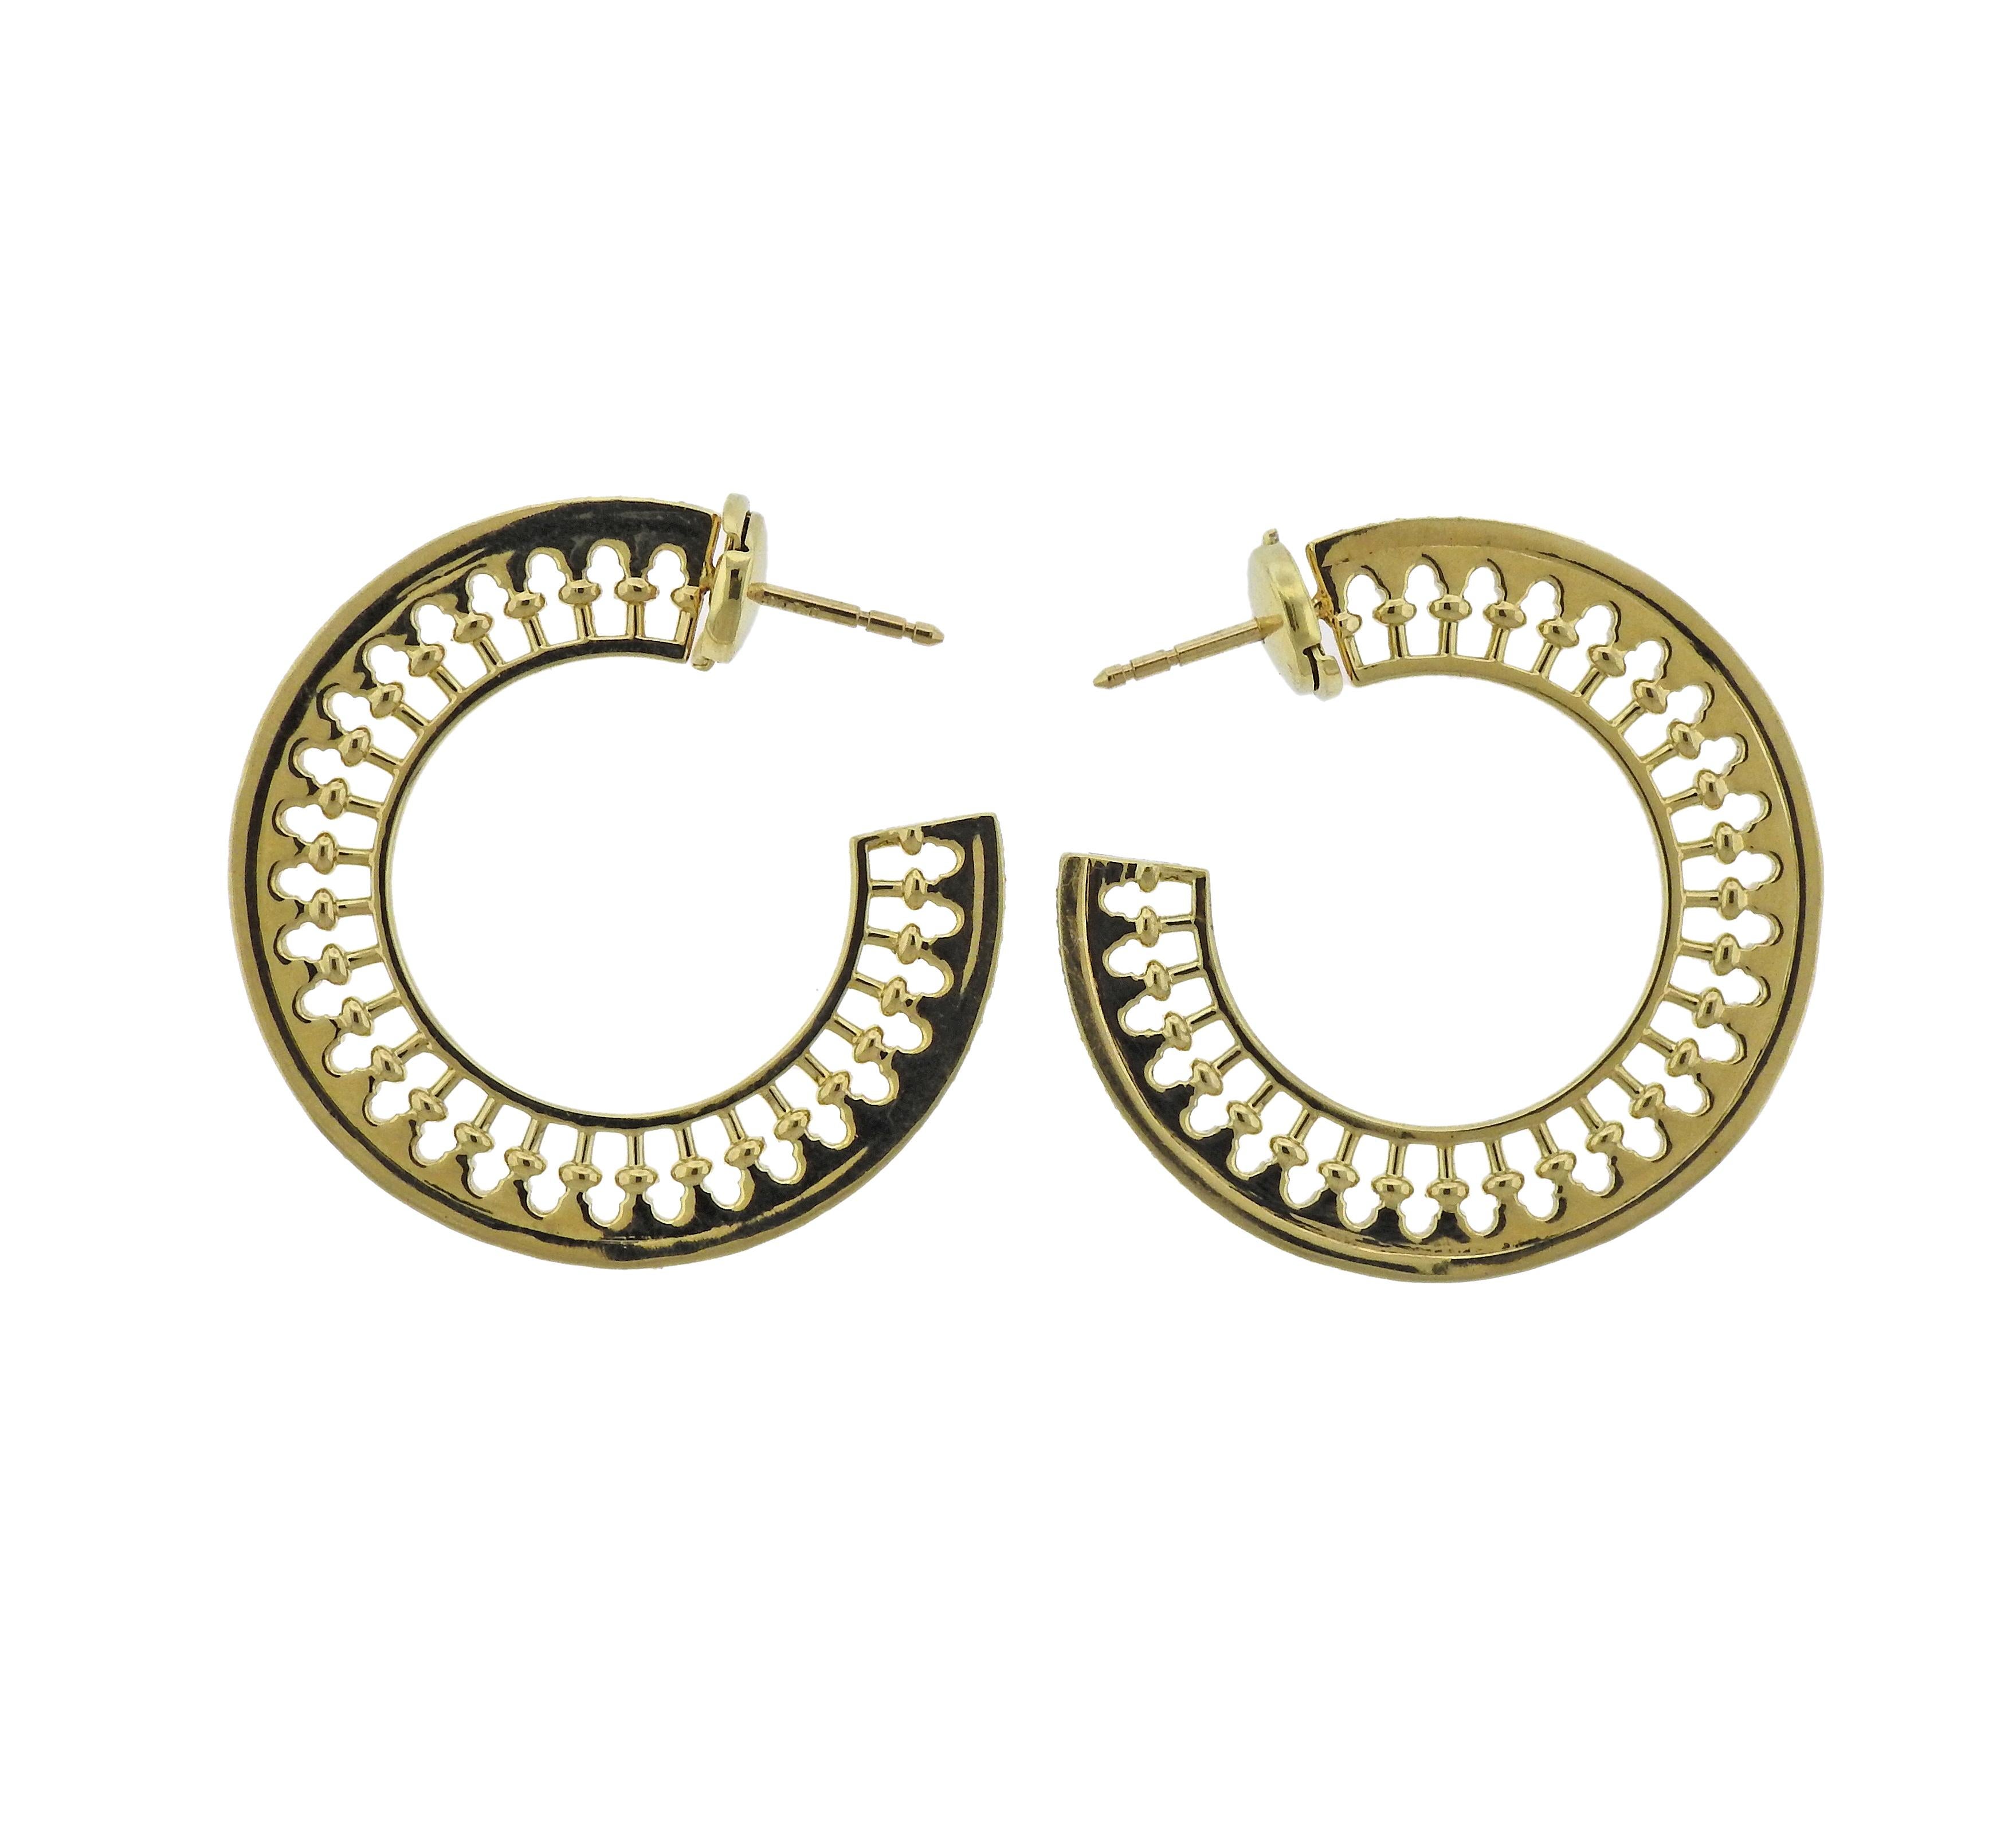 Pair of 18k gold hoop earrings by Paloma Picasso, crafted for Venezia Stella collection Tiffany & Co. Set with approx. 1.17ctw in diamonds. Earrings are 35mm in diameter , weigh 17 grams. Marked Tiffany & Co, Paloma Picasso, 750.